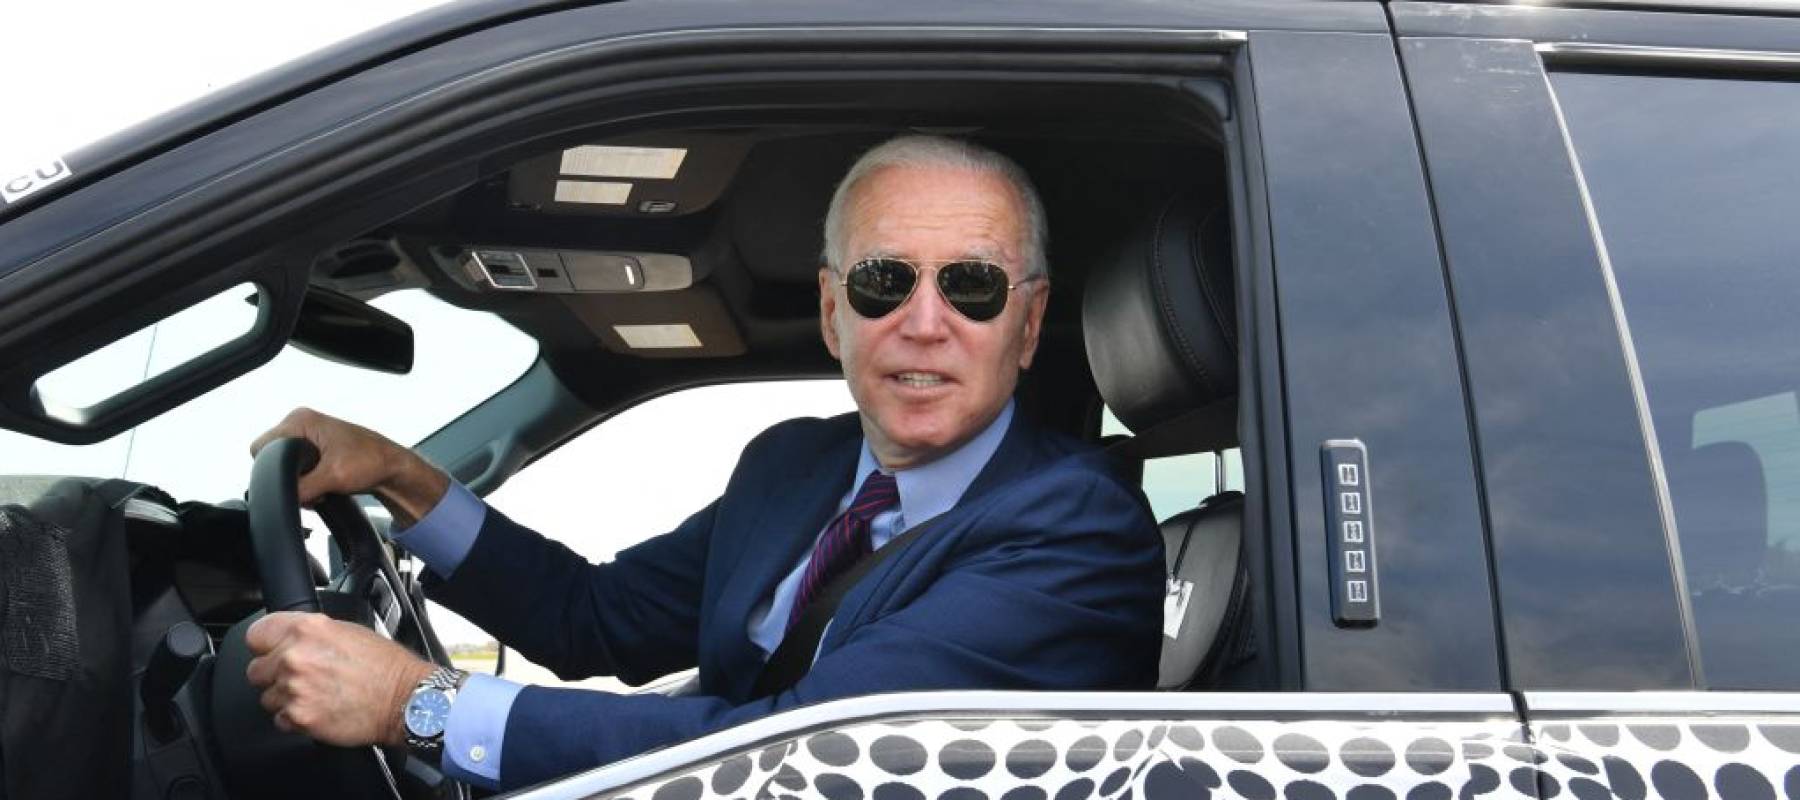 US President Joe Biden drives the new electric Ford F-150 Lightning at the Ford Dearborn Development Center in Dearborn, Michigan on May 18, 2021